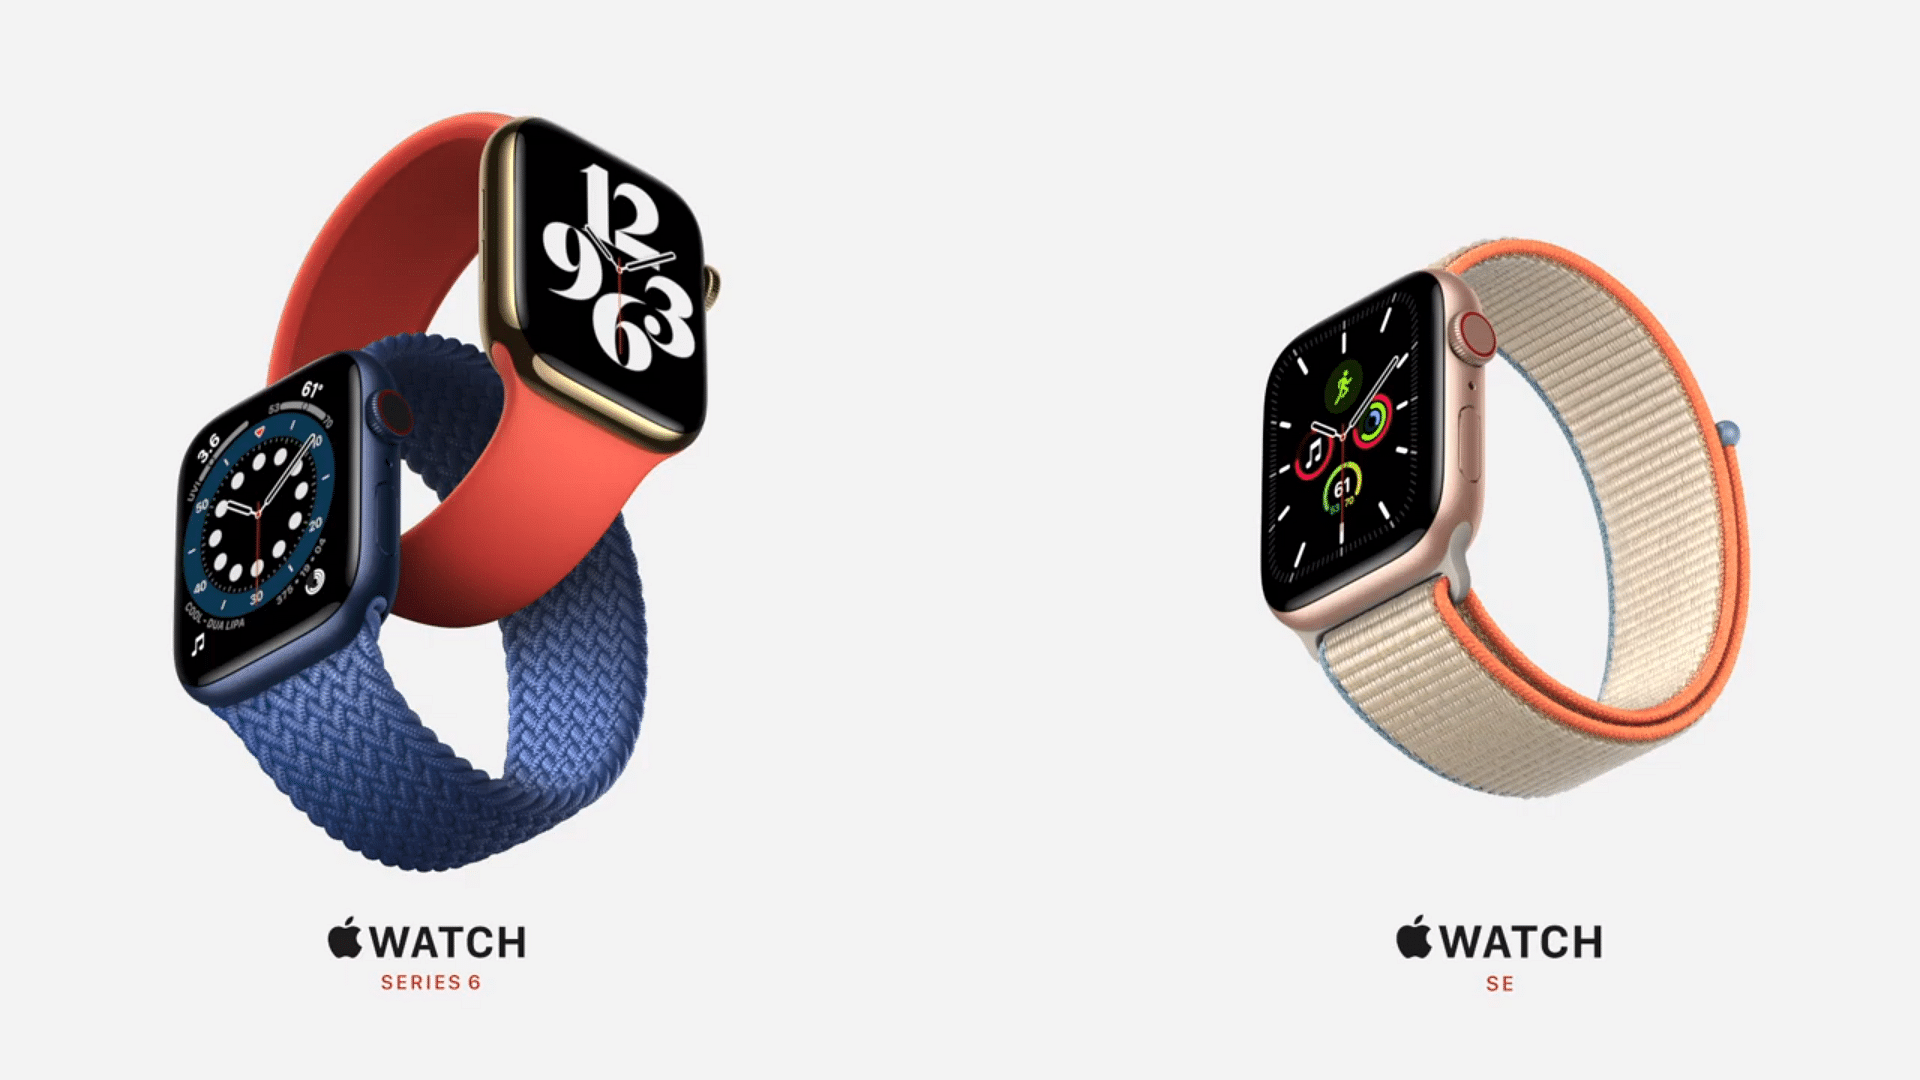 Apple Watch Series 6 (left) and more economical Apple Watch SE (right).